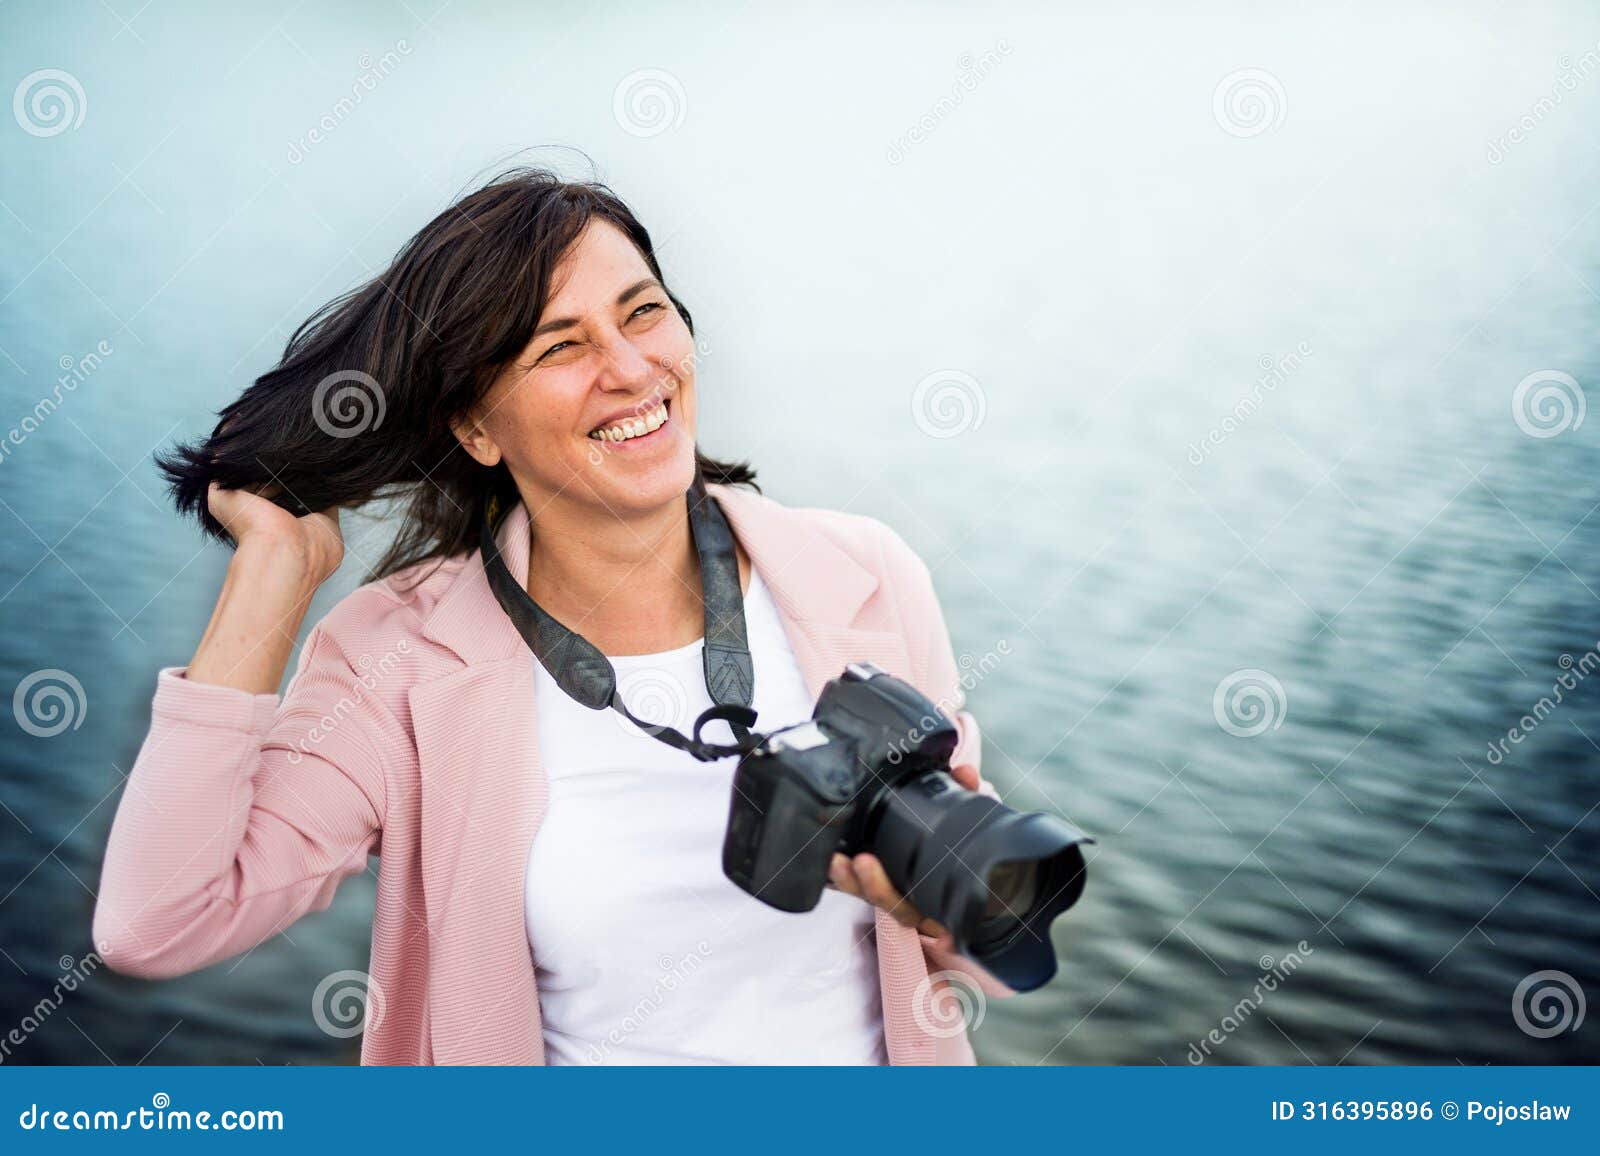 portrait of beautiful mature woman on vacation, taking photos with professional camera, capturing beauty in nature